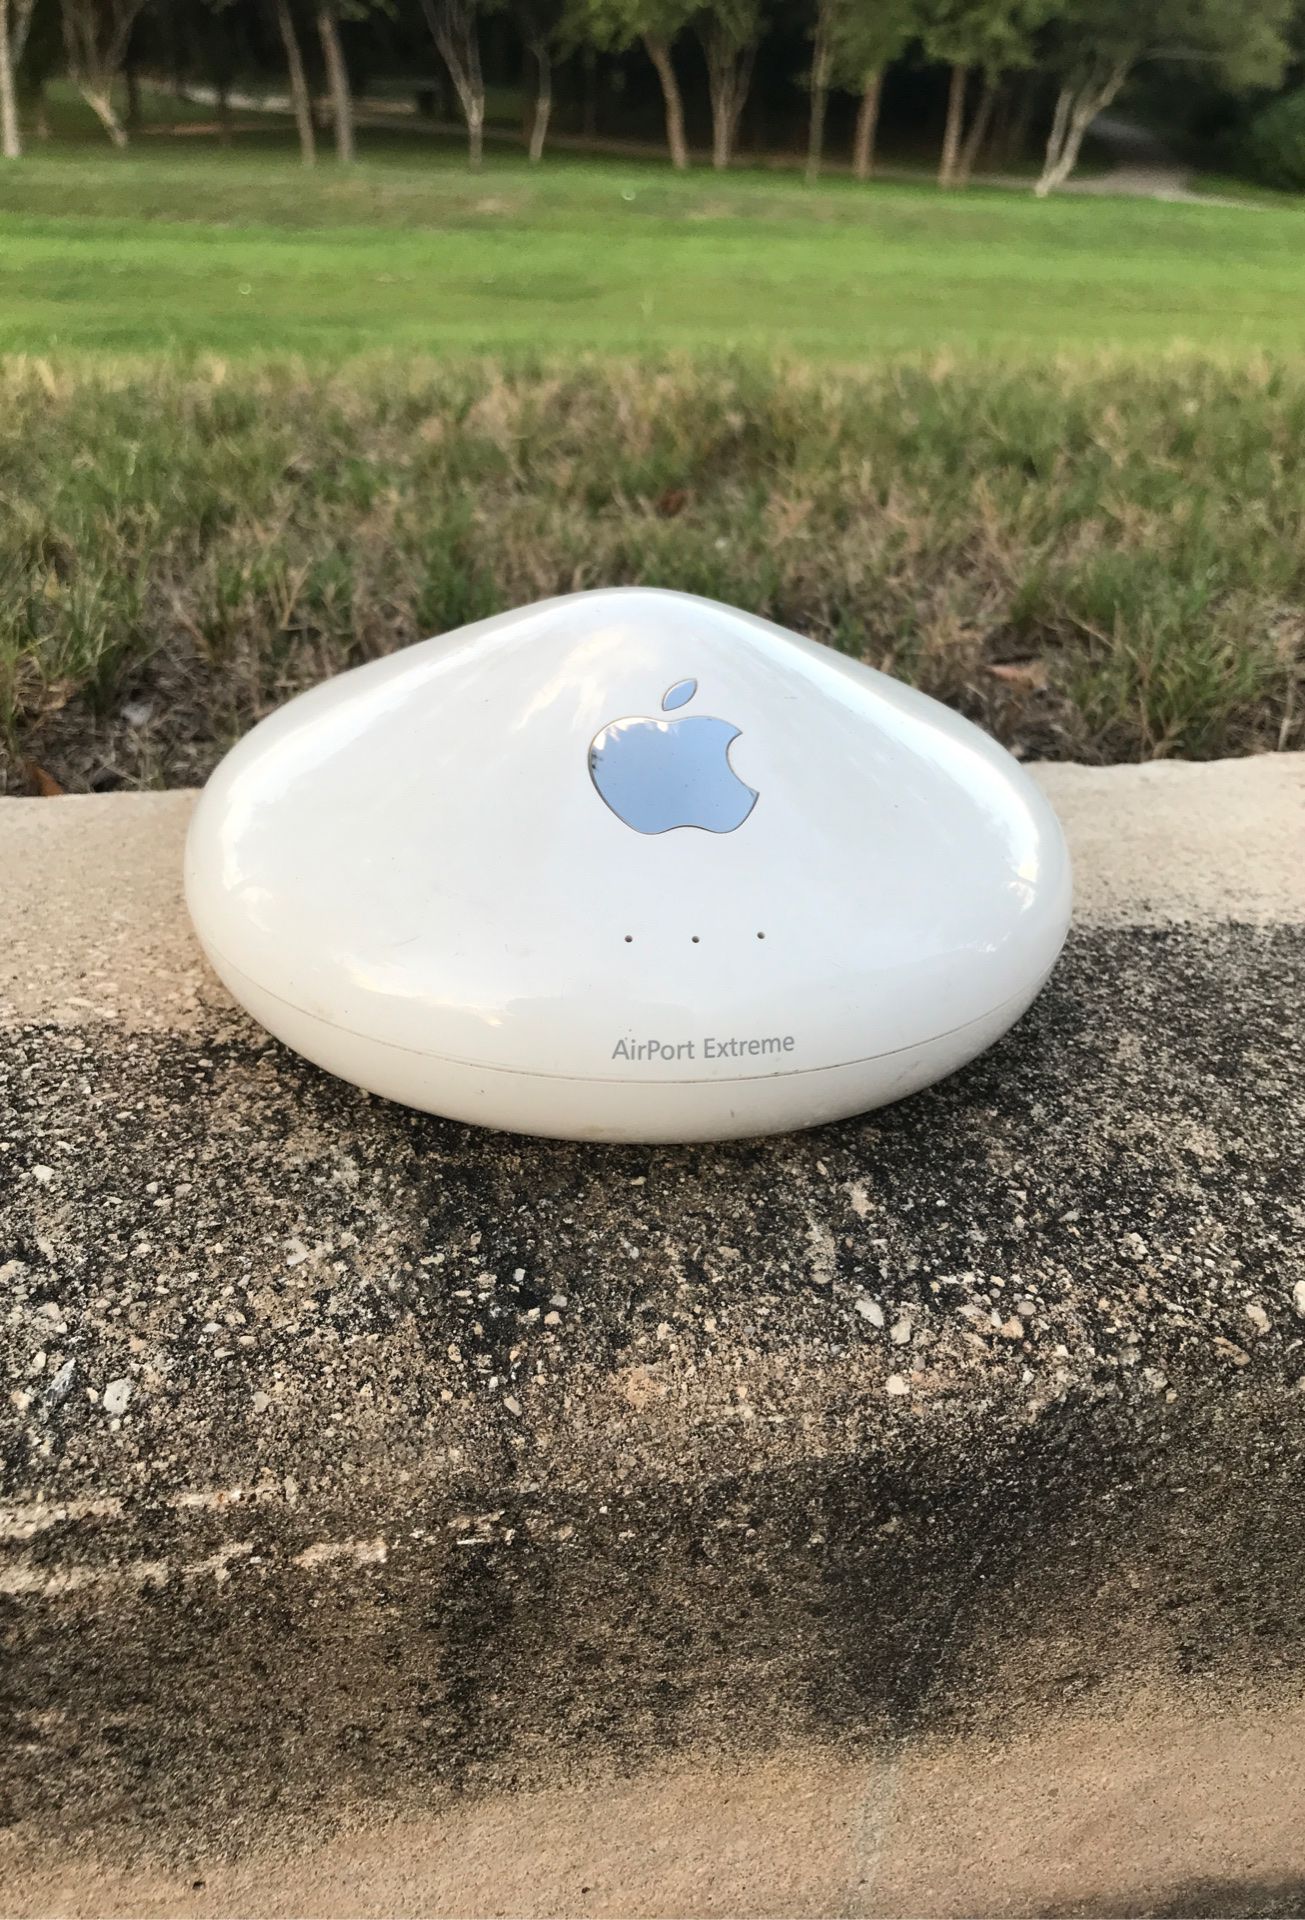 Apple AirPort Extreme Original Round WiFi Base Station Router Used Works